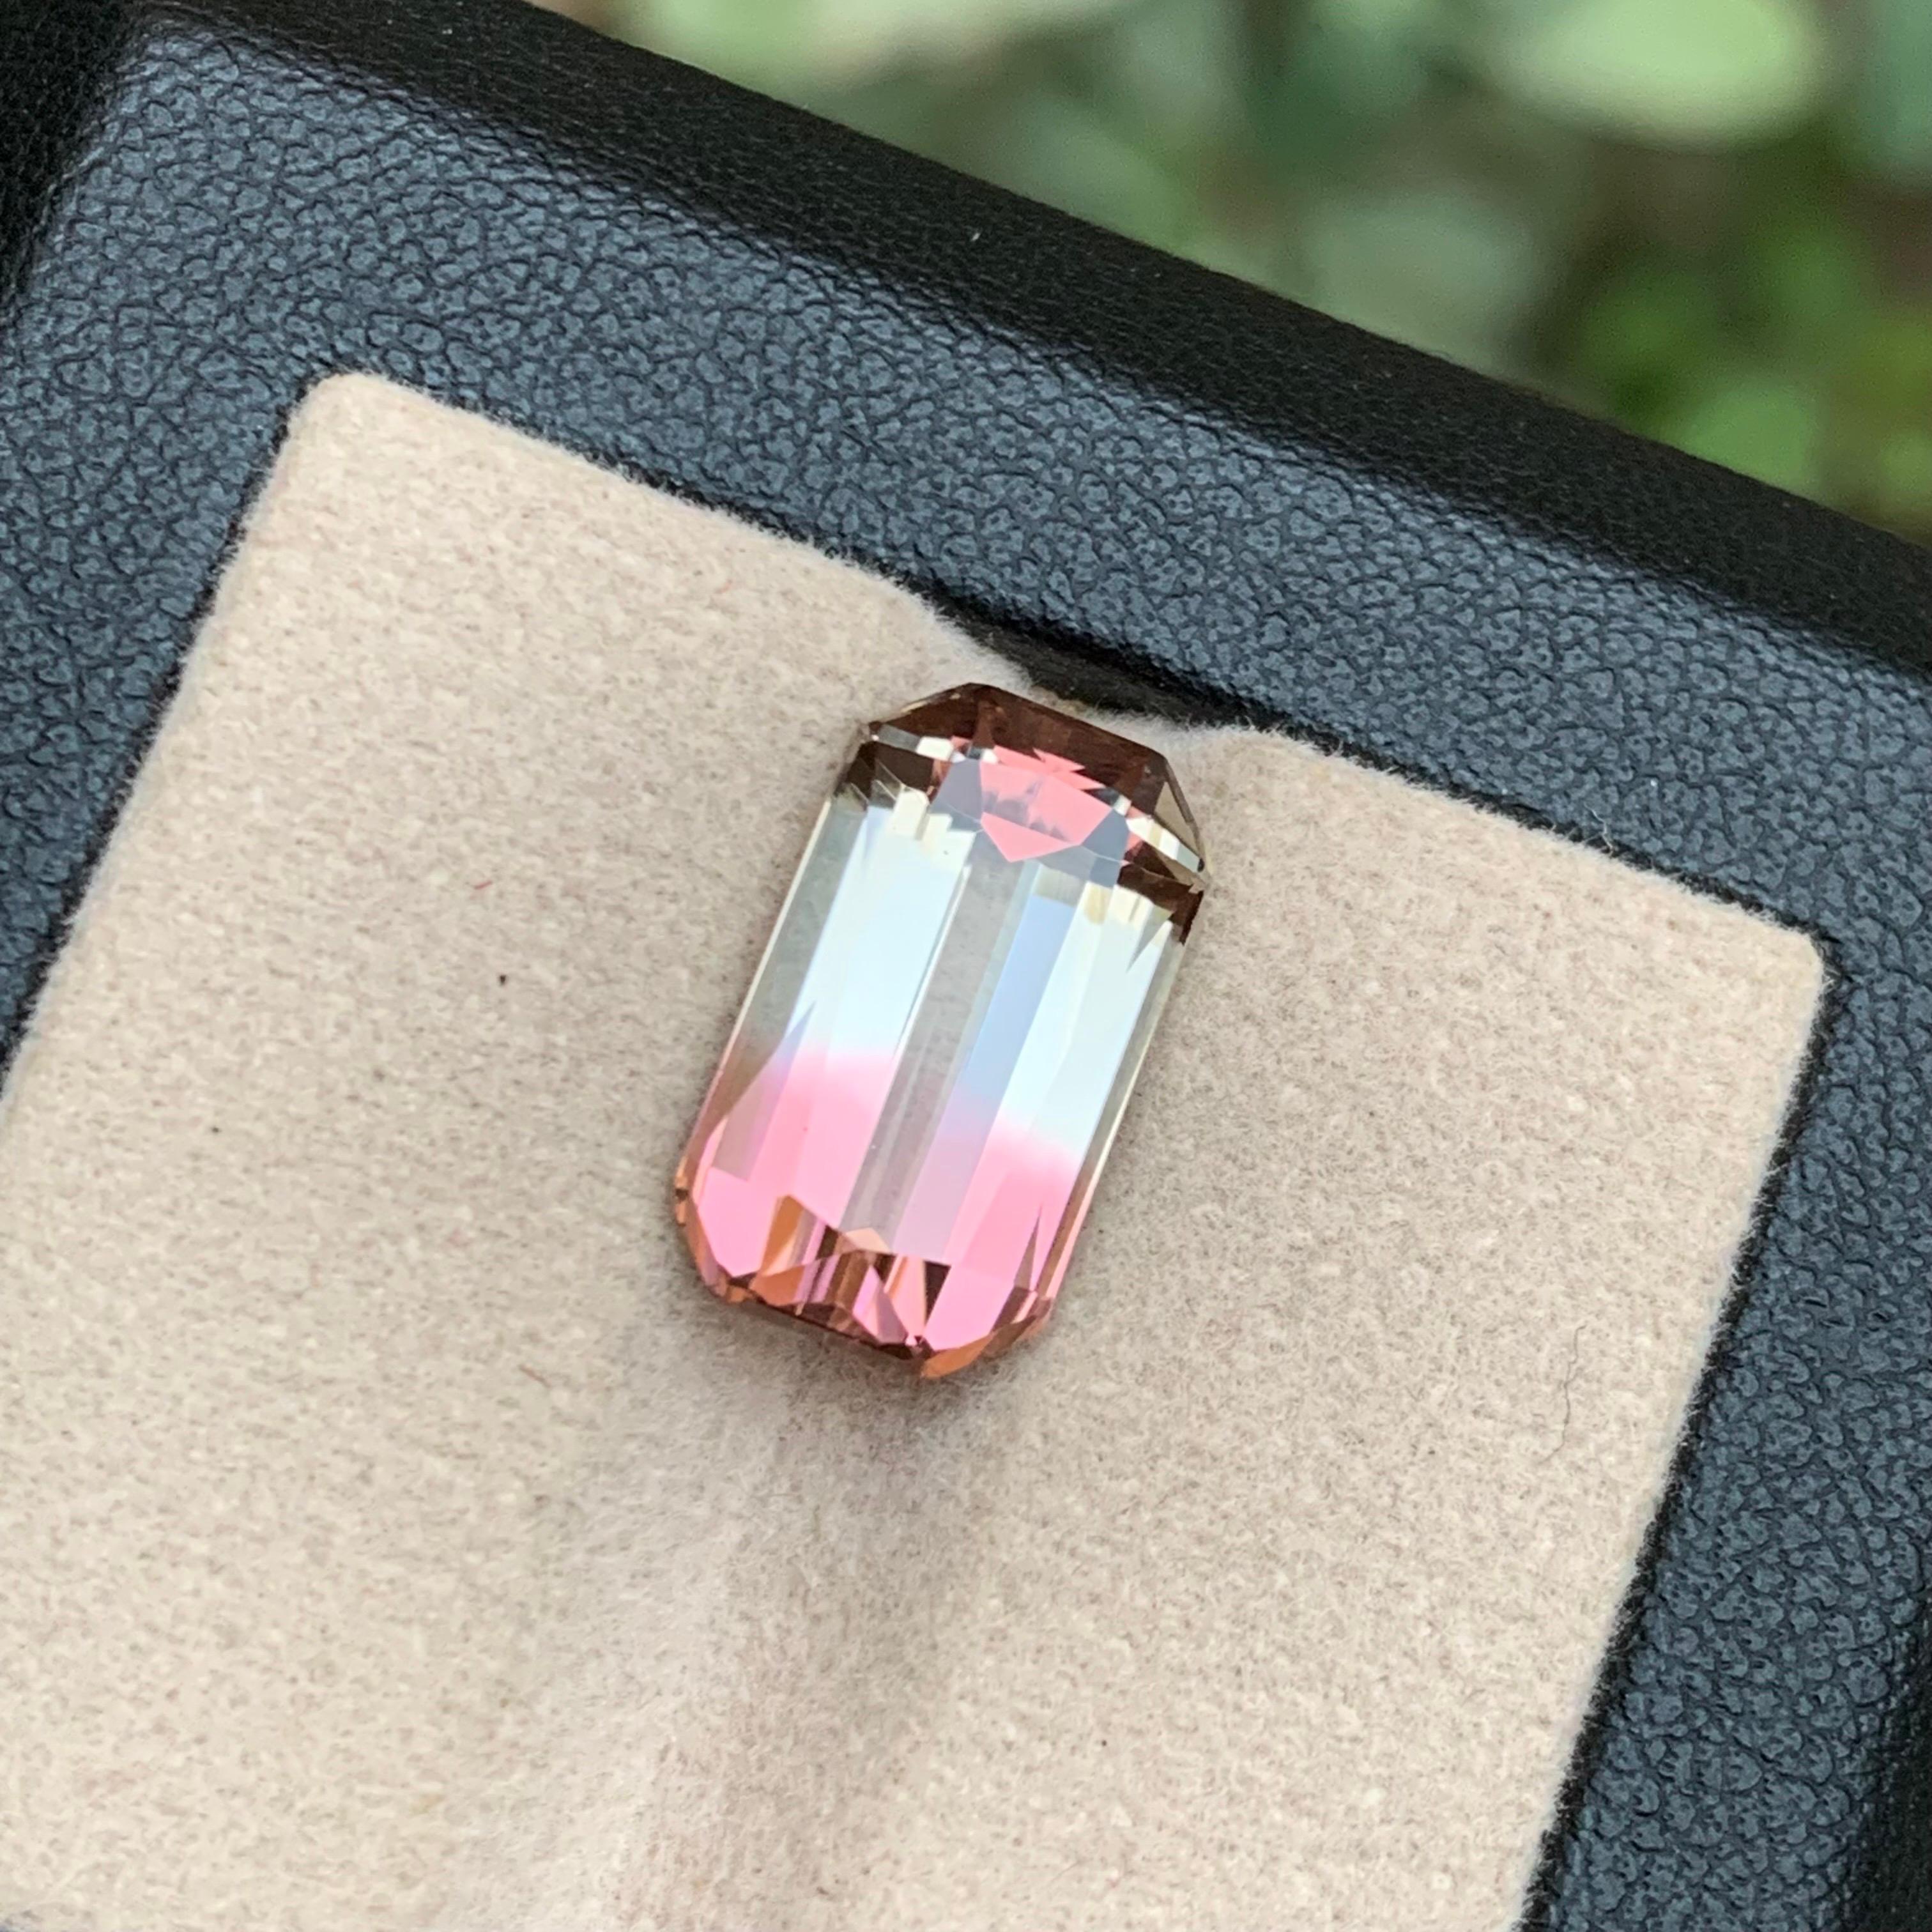 Gemstone Type: Tourmaline
Weight: 8.05 Carat
Dimensions: 14.75 x 8.63 x 7.21 mm
Color: Pink & White Bicolor
Cut & Shape: Scissors Emerald Cut
Clarity: Eye Clean
Origin: Kunar, Afghanistan
Certificate: On Demand

Afghan Bicolor Tourmaline is admired